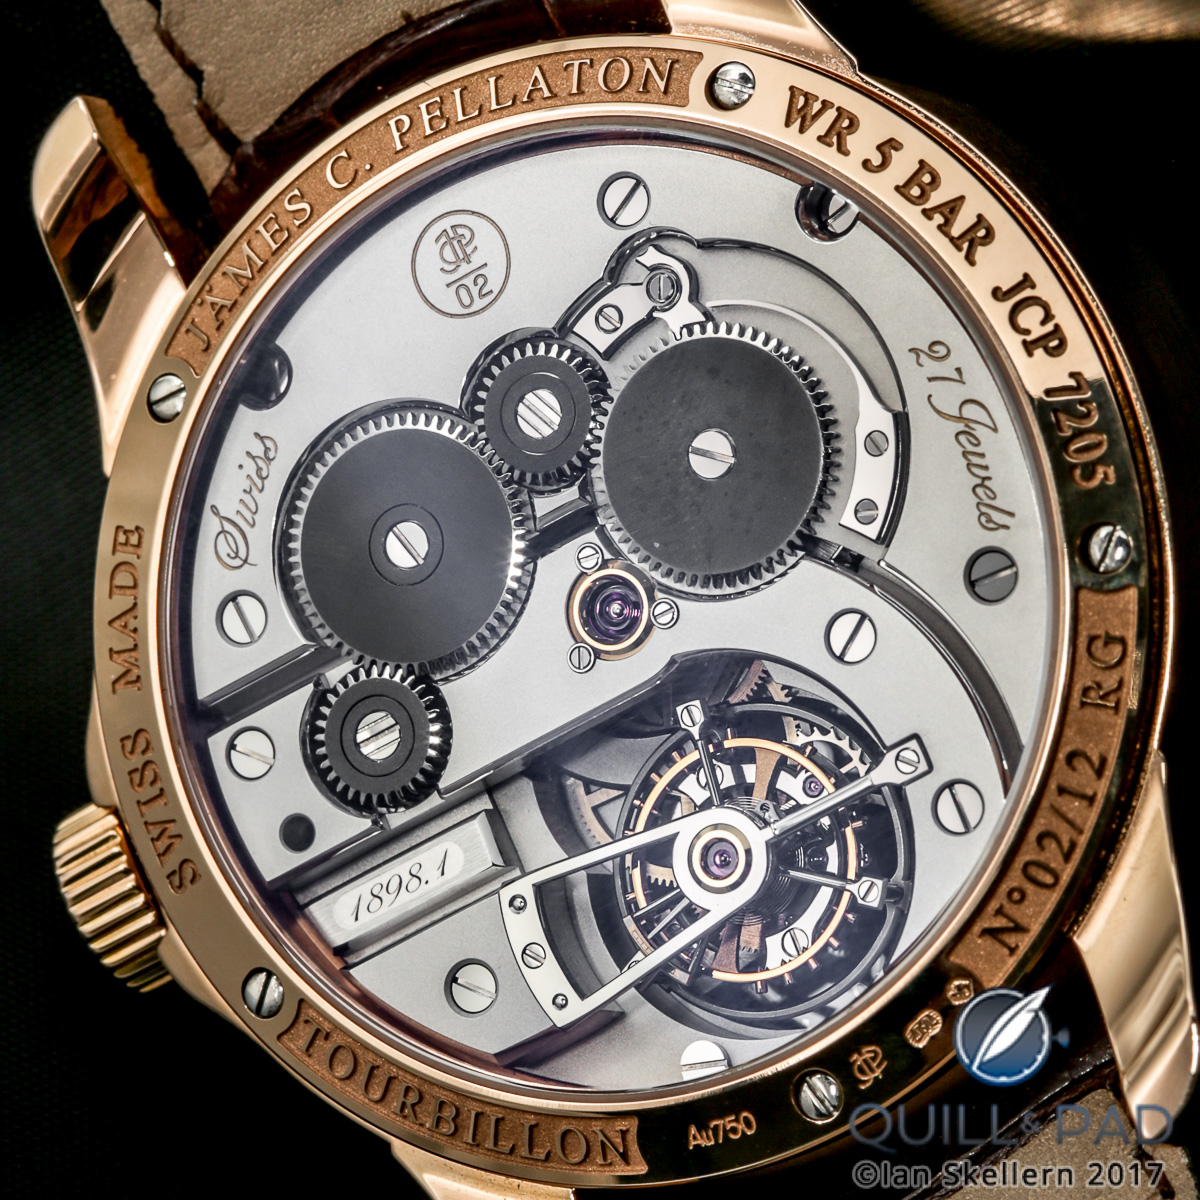 Close up look at the movement through the display back of the James Pellaton Chronometer Royal Marine